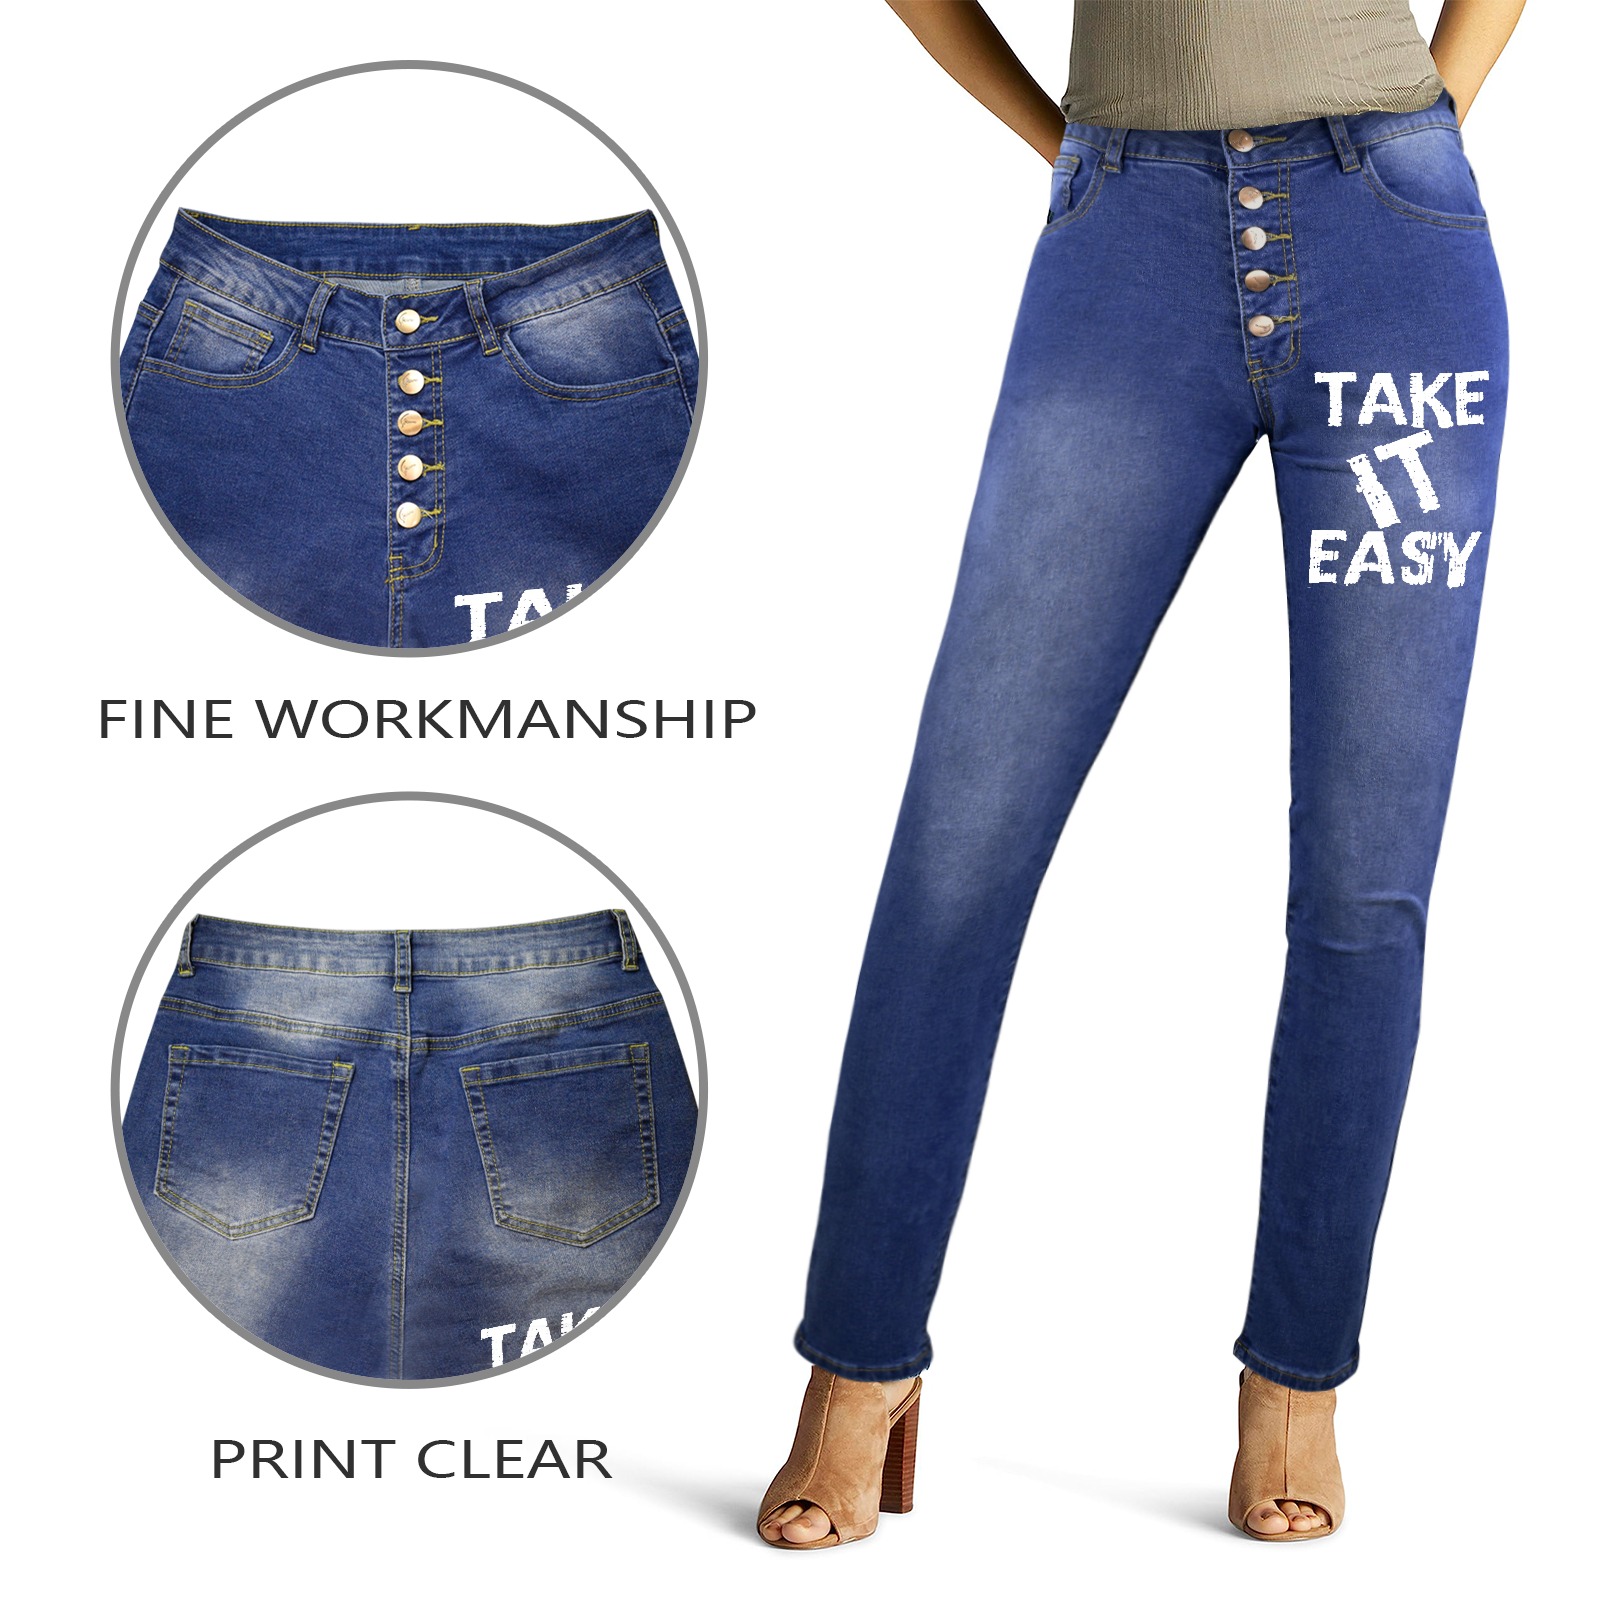 Take it easy charming white text, typography art. Women's Jeans (Front&Back Printing)